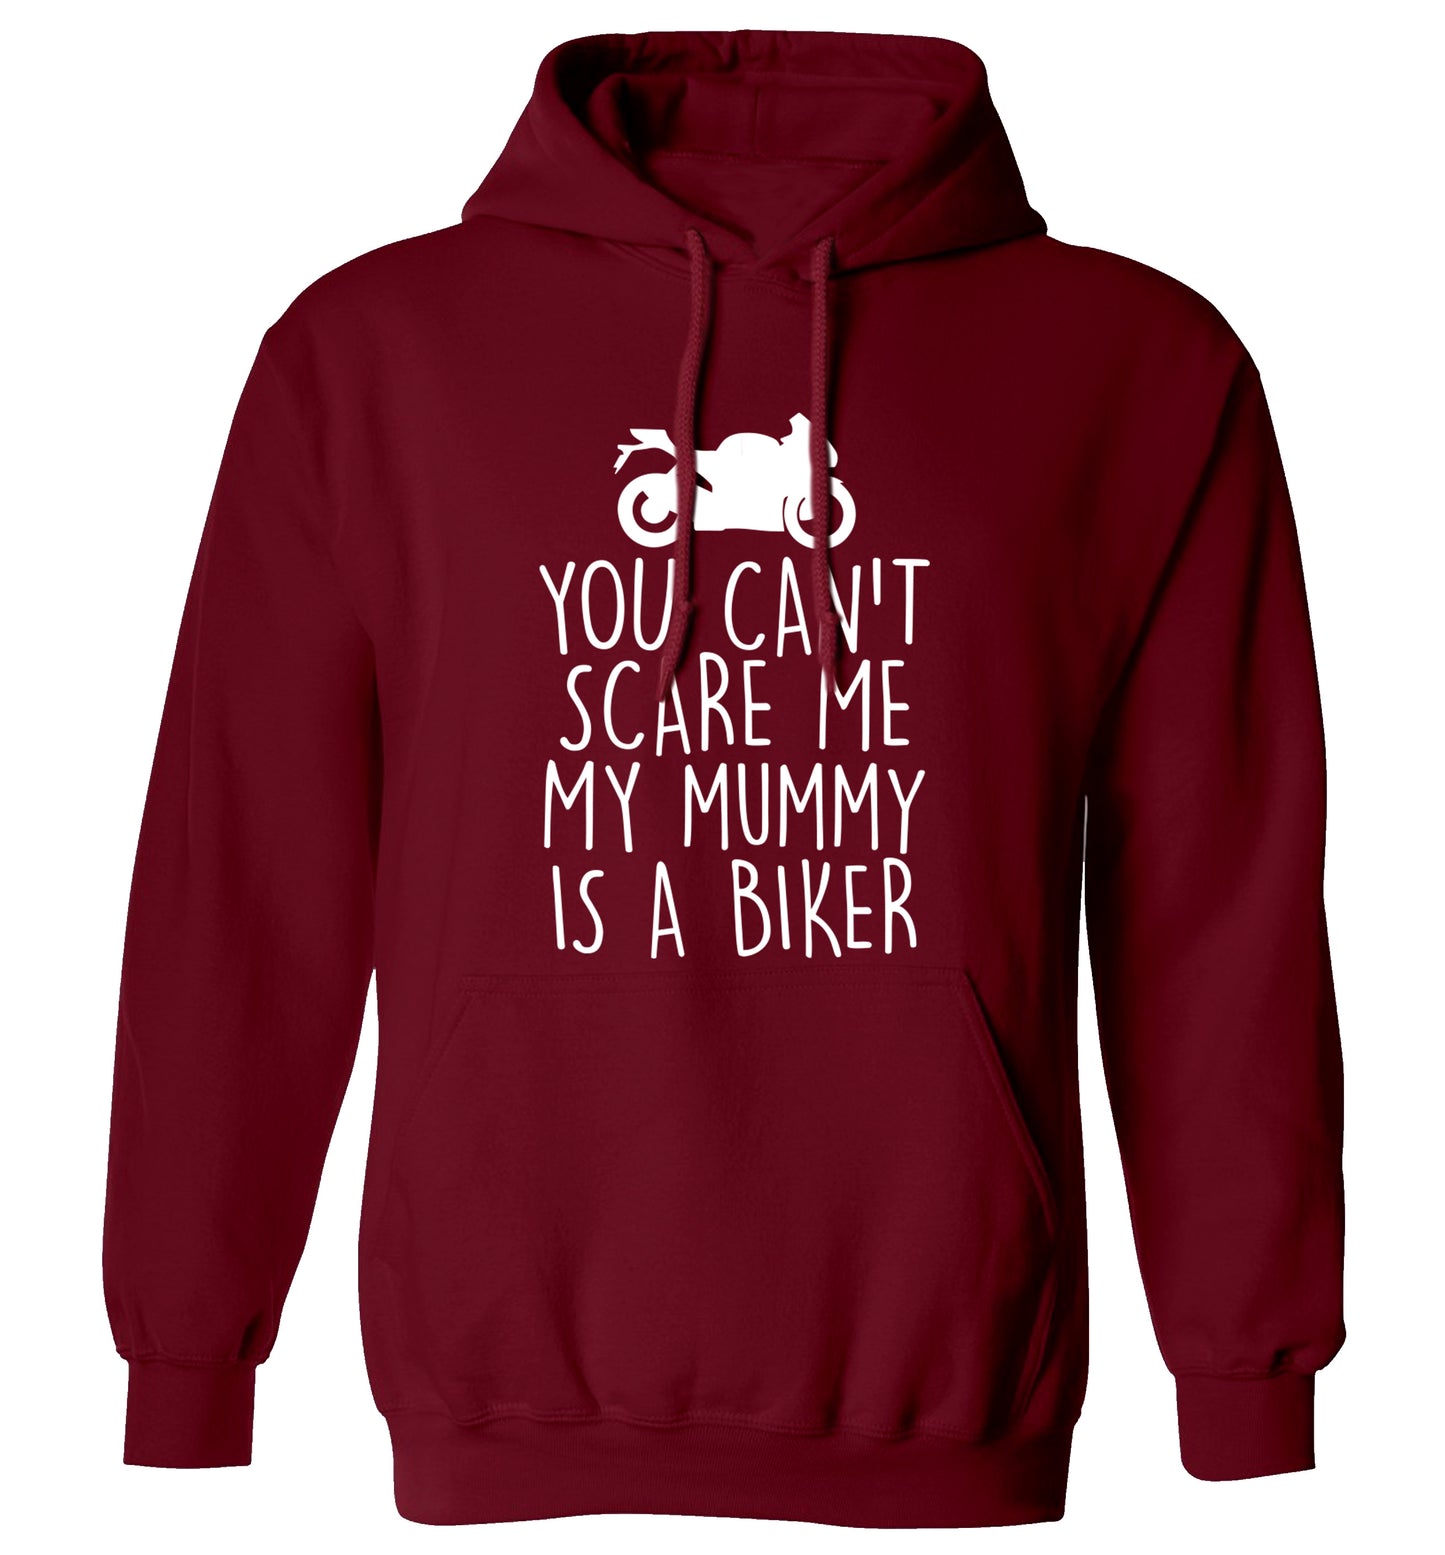 You can't scare me my mummy is a biker adults unisex maroon hoodie 2XL